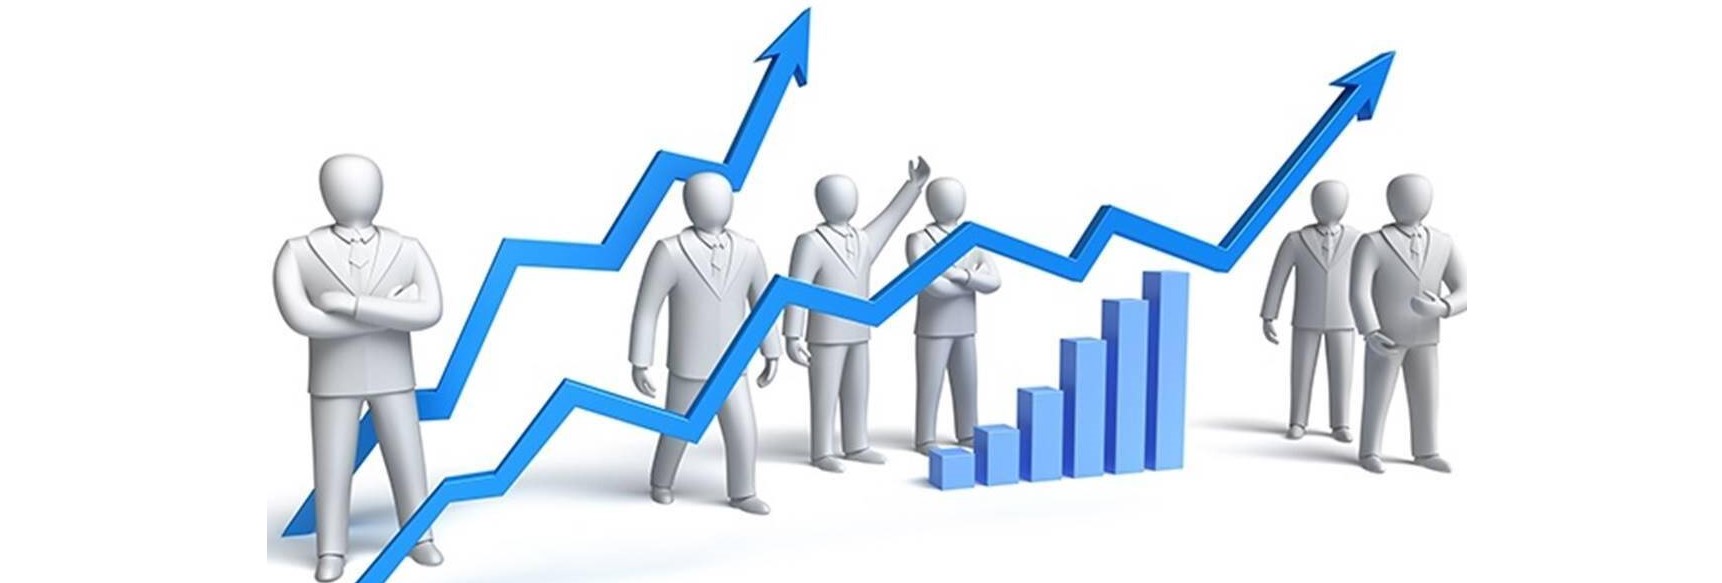 Several faceless grey figures are gathered around the rising blue arrow and bar charts with a white background.